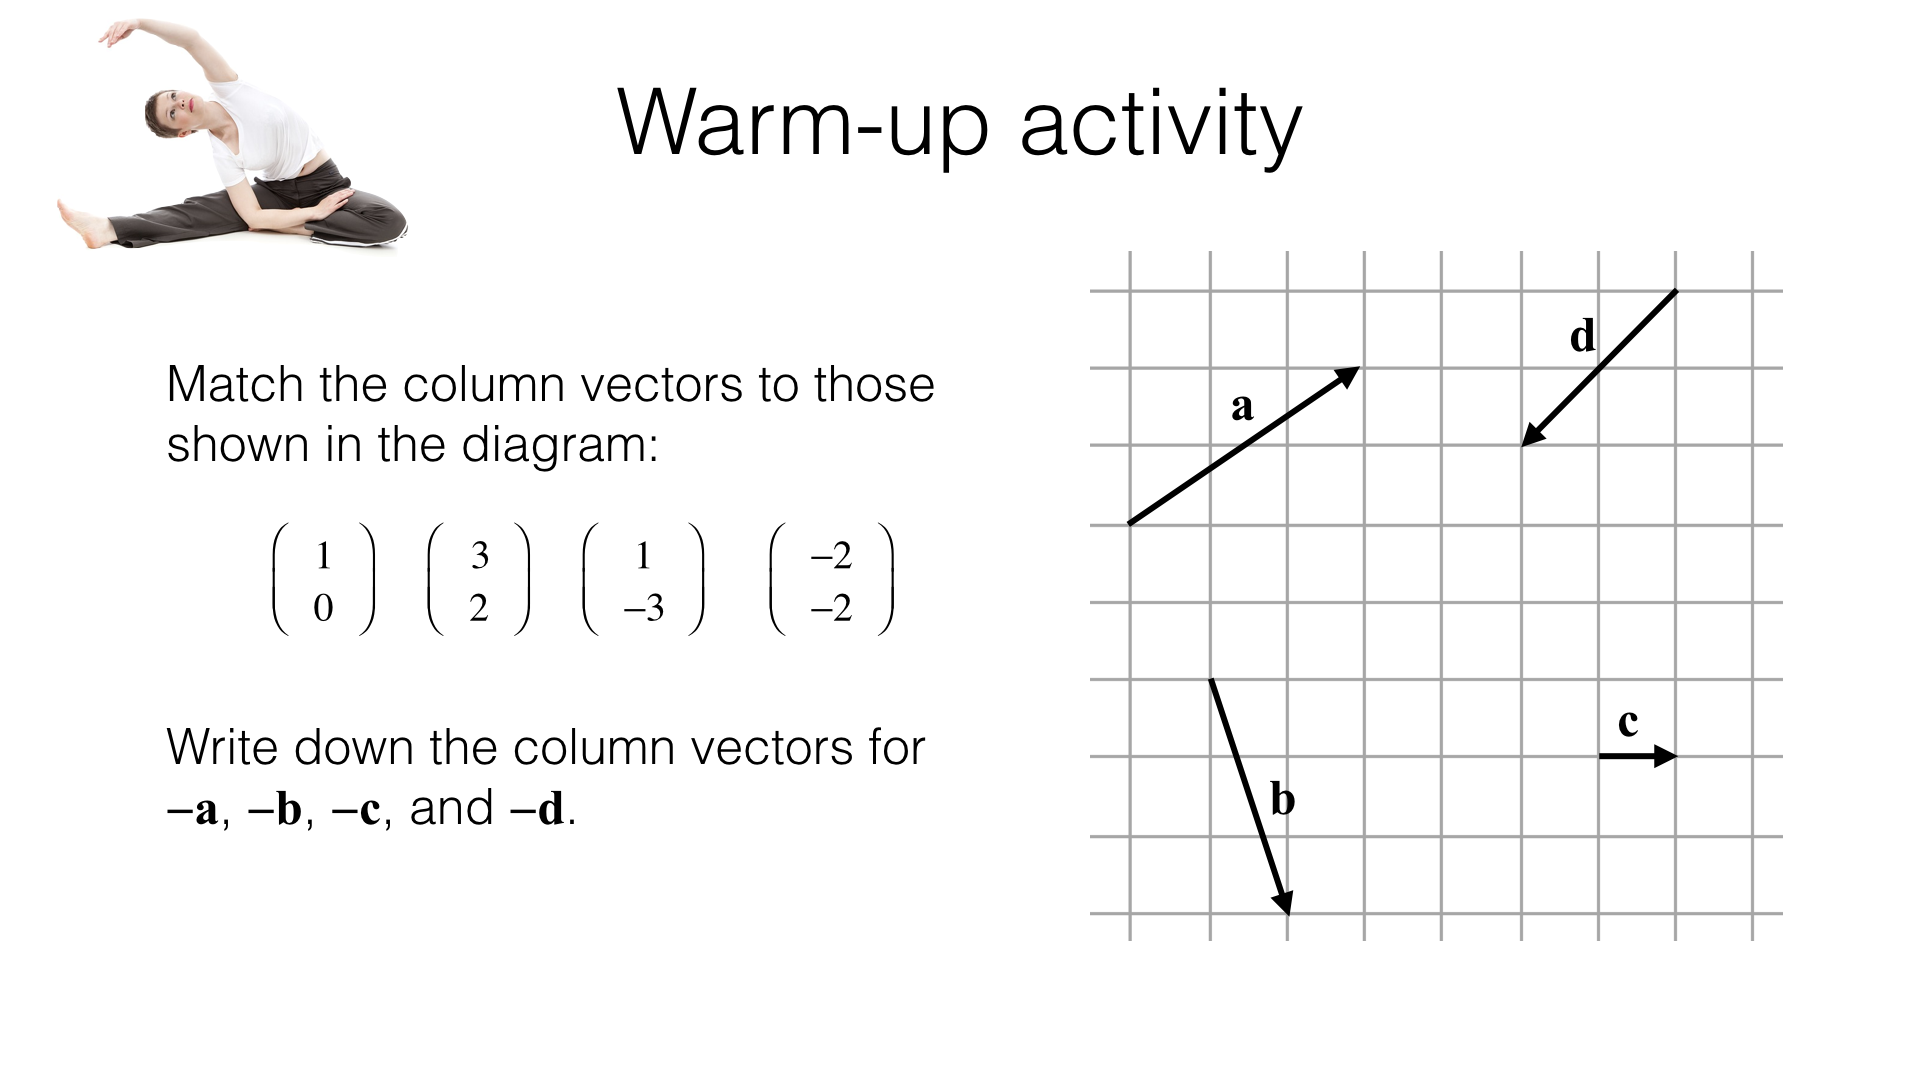 G25a Adding and subtracting column vectors